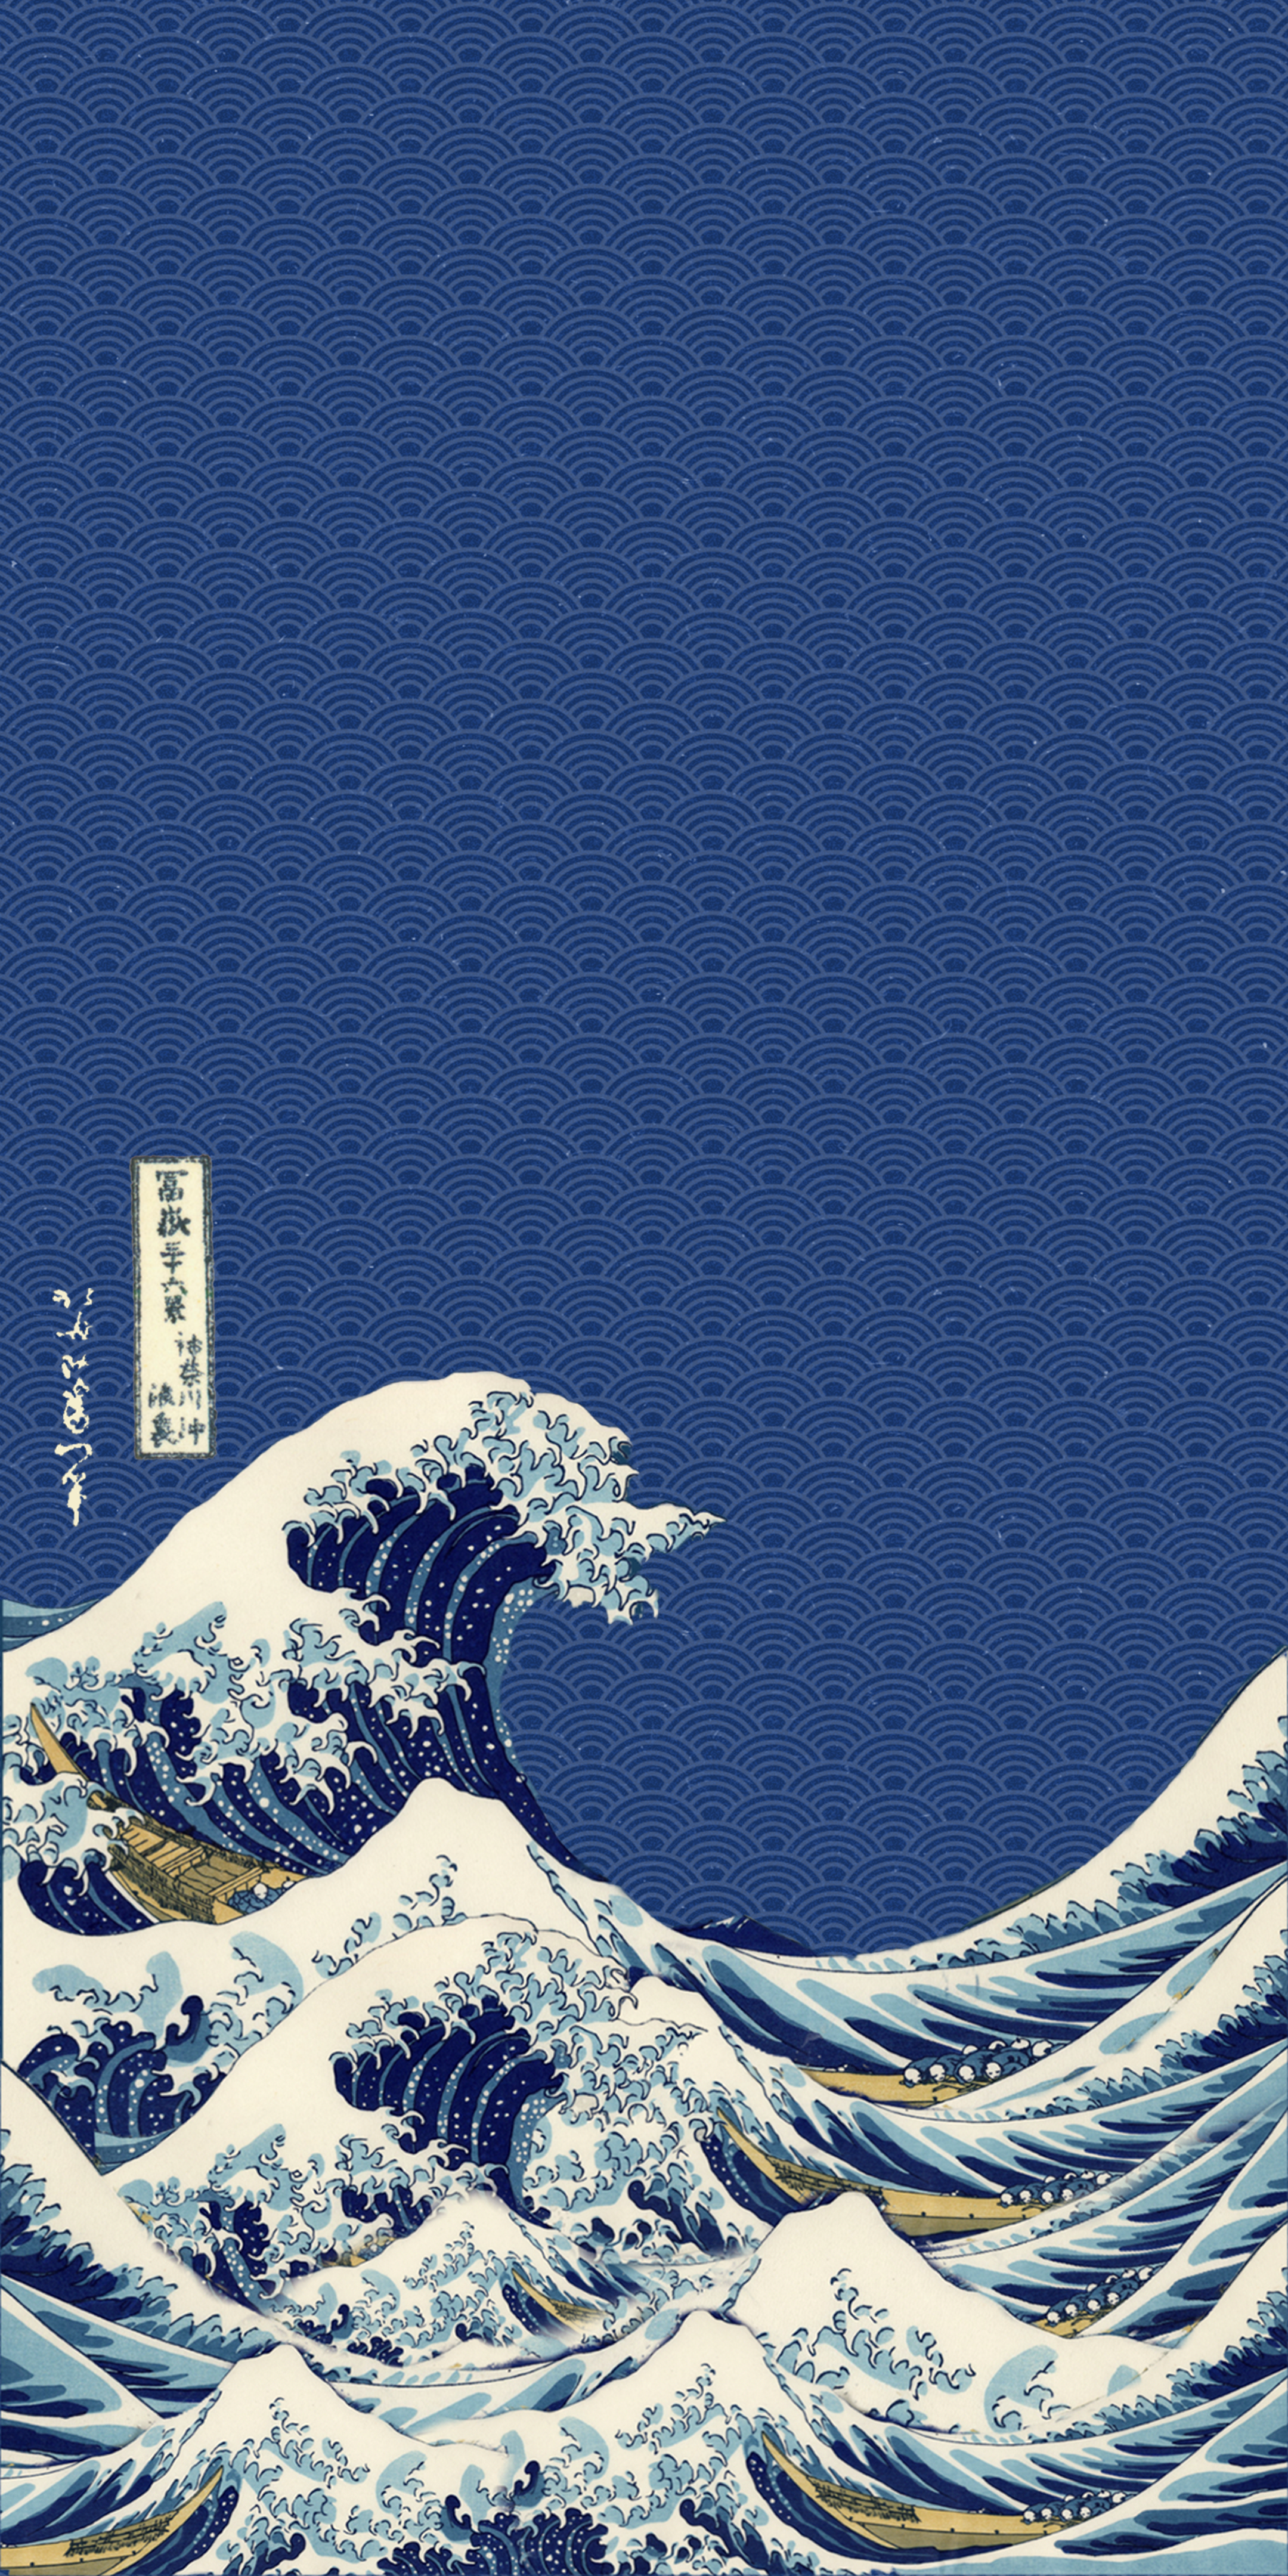 Great wave of kanagawa think you guys could find me a wallpaper similar to this. Waves wallpaper iphone, Waves wallpaper, Pop art wallpaper